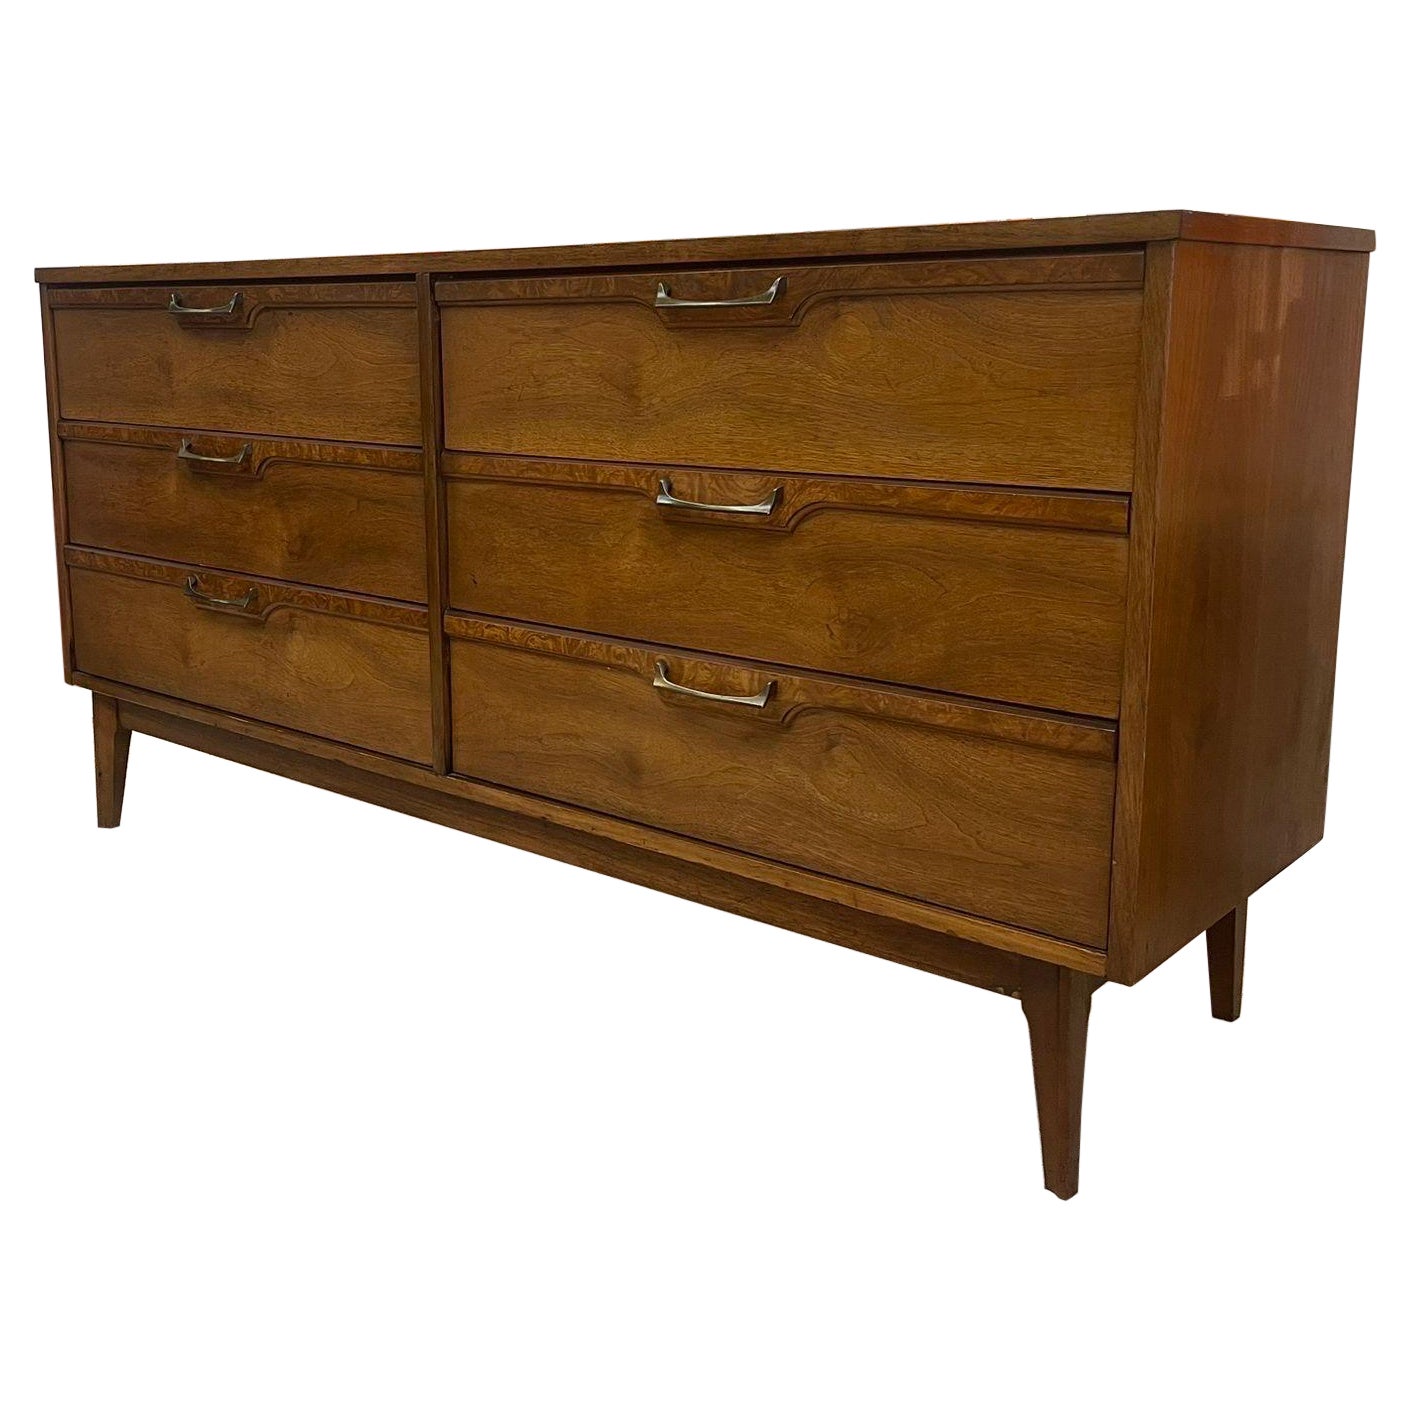 Vintage Mid Century Modern Walnut Toned Credenza With Burl Wood Accents. For Sale